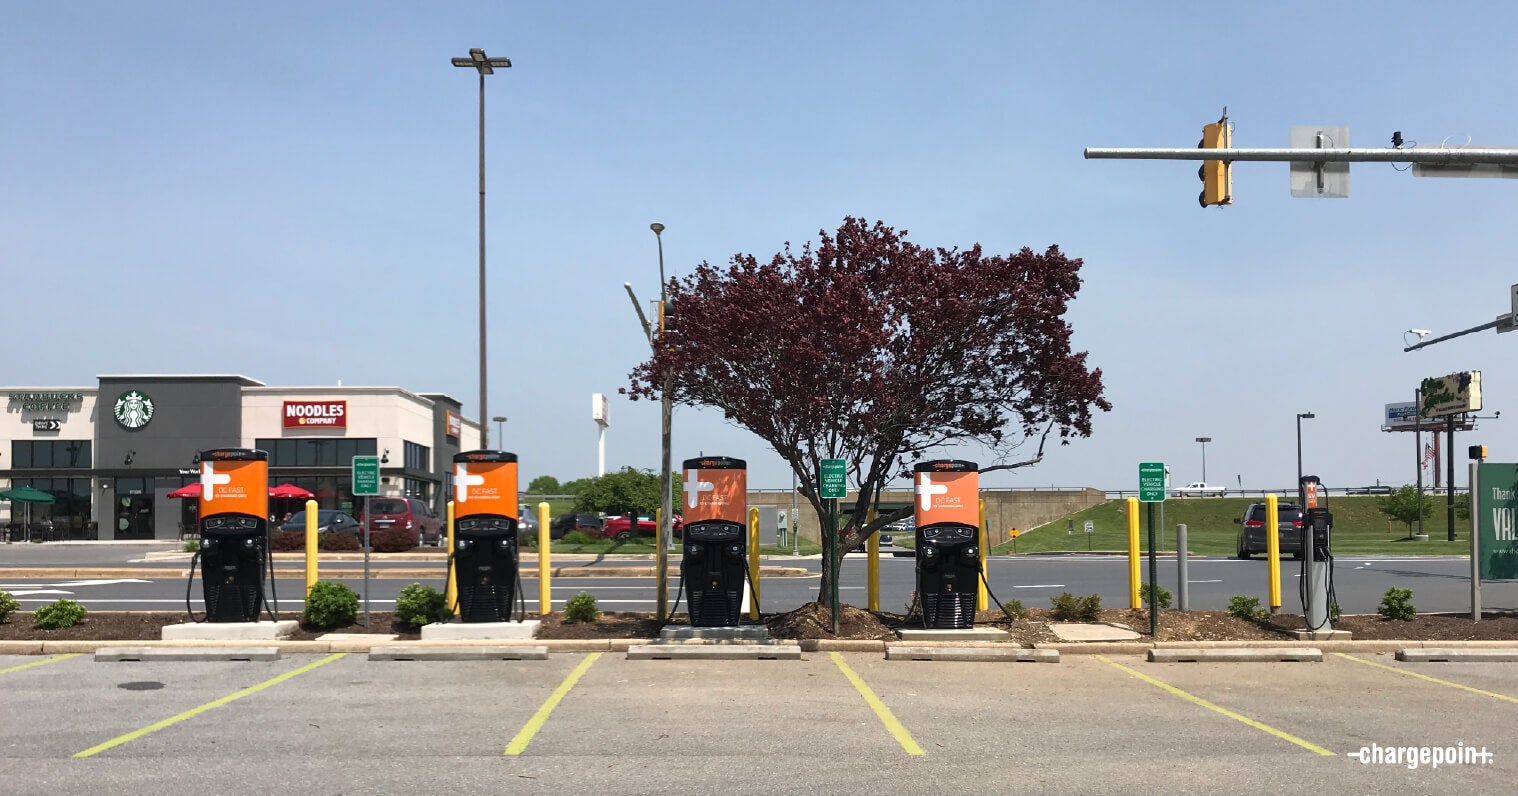 ChargePoint CPE 200s In Retail Setting